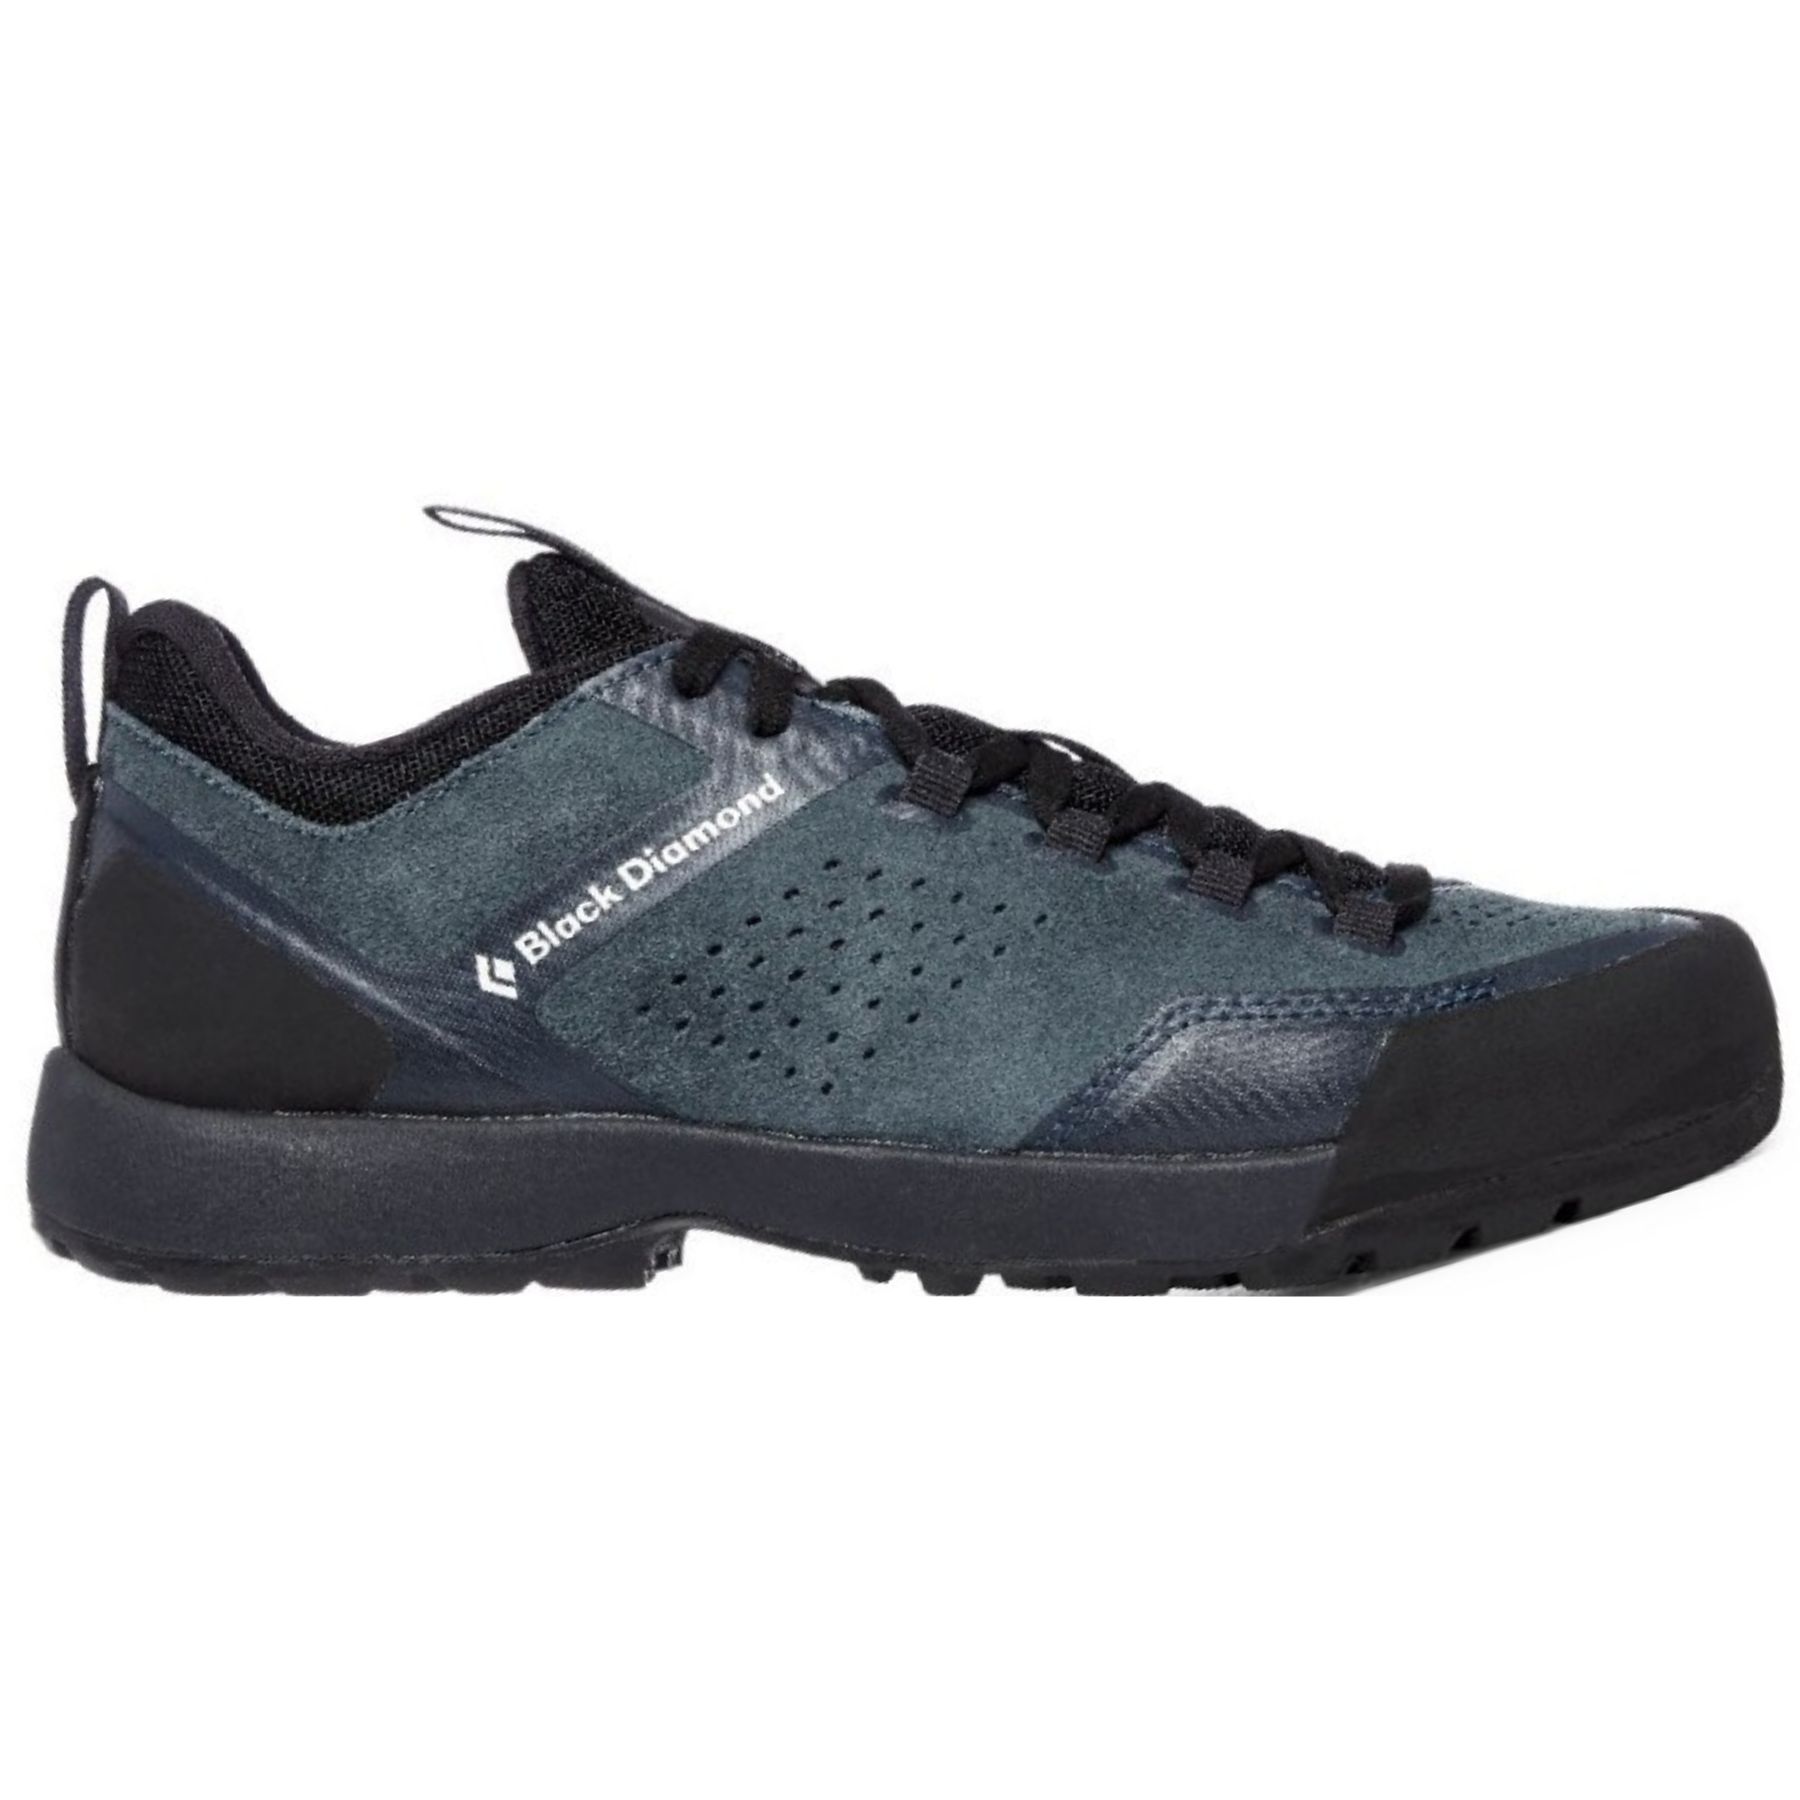 Black Diamond Mission XP Leather - Chaussures approche femme